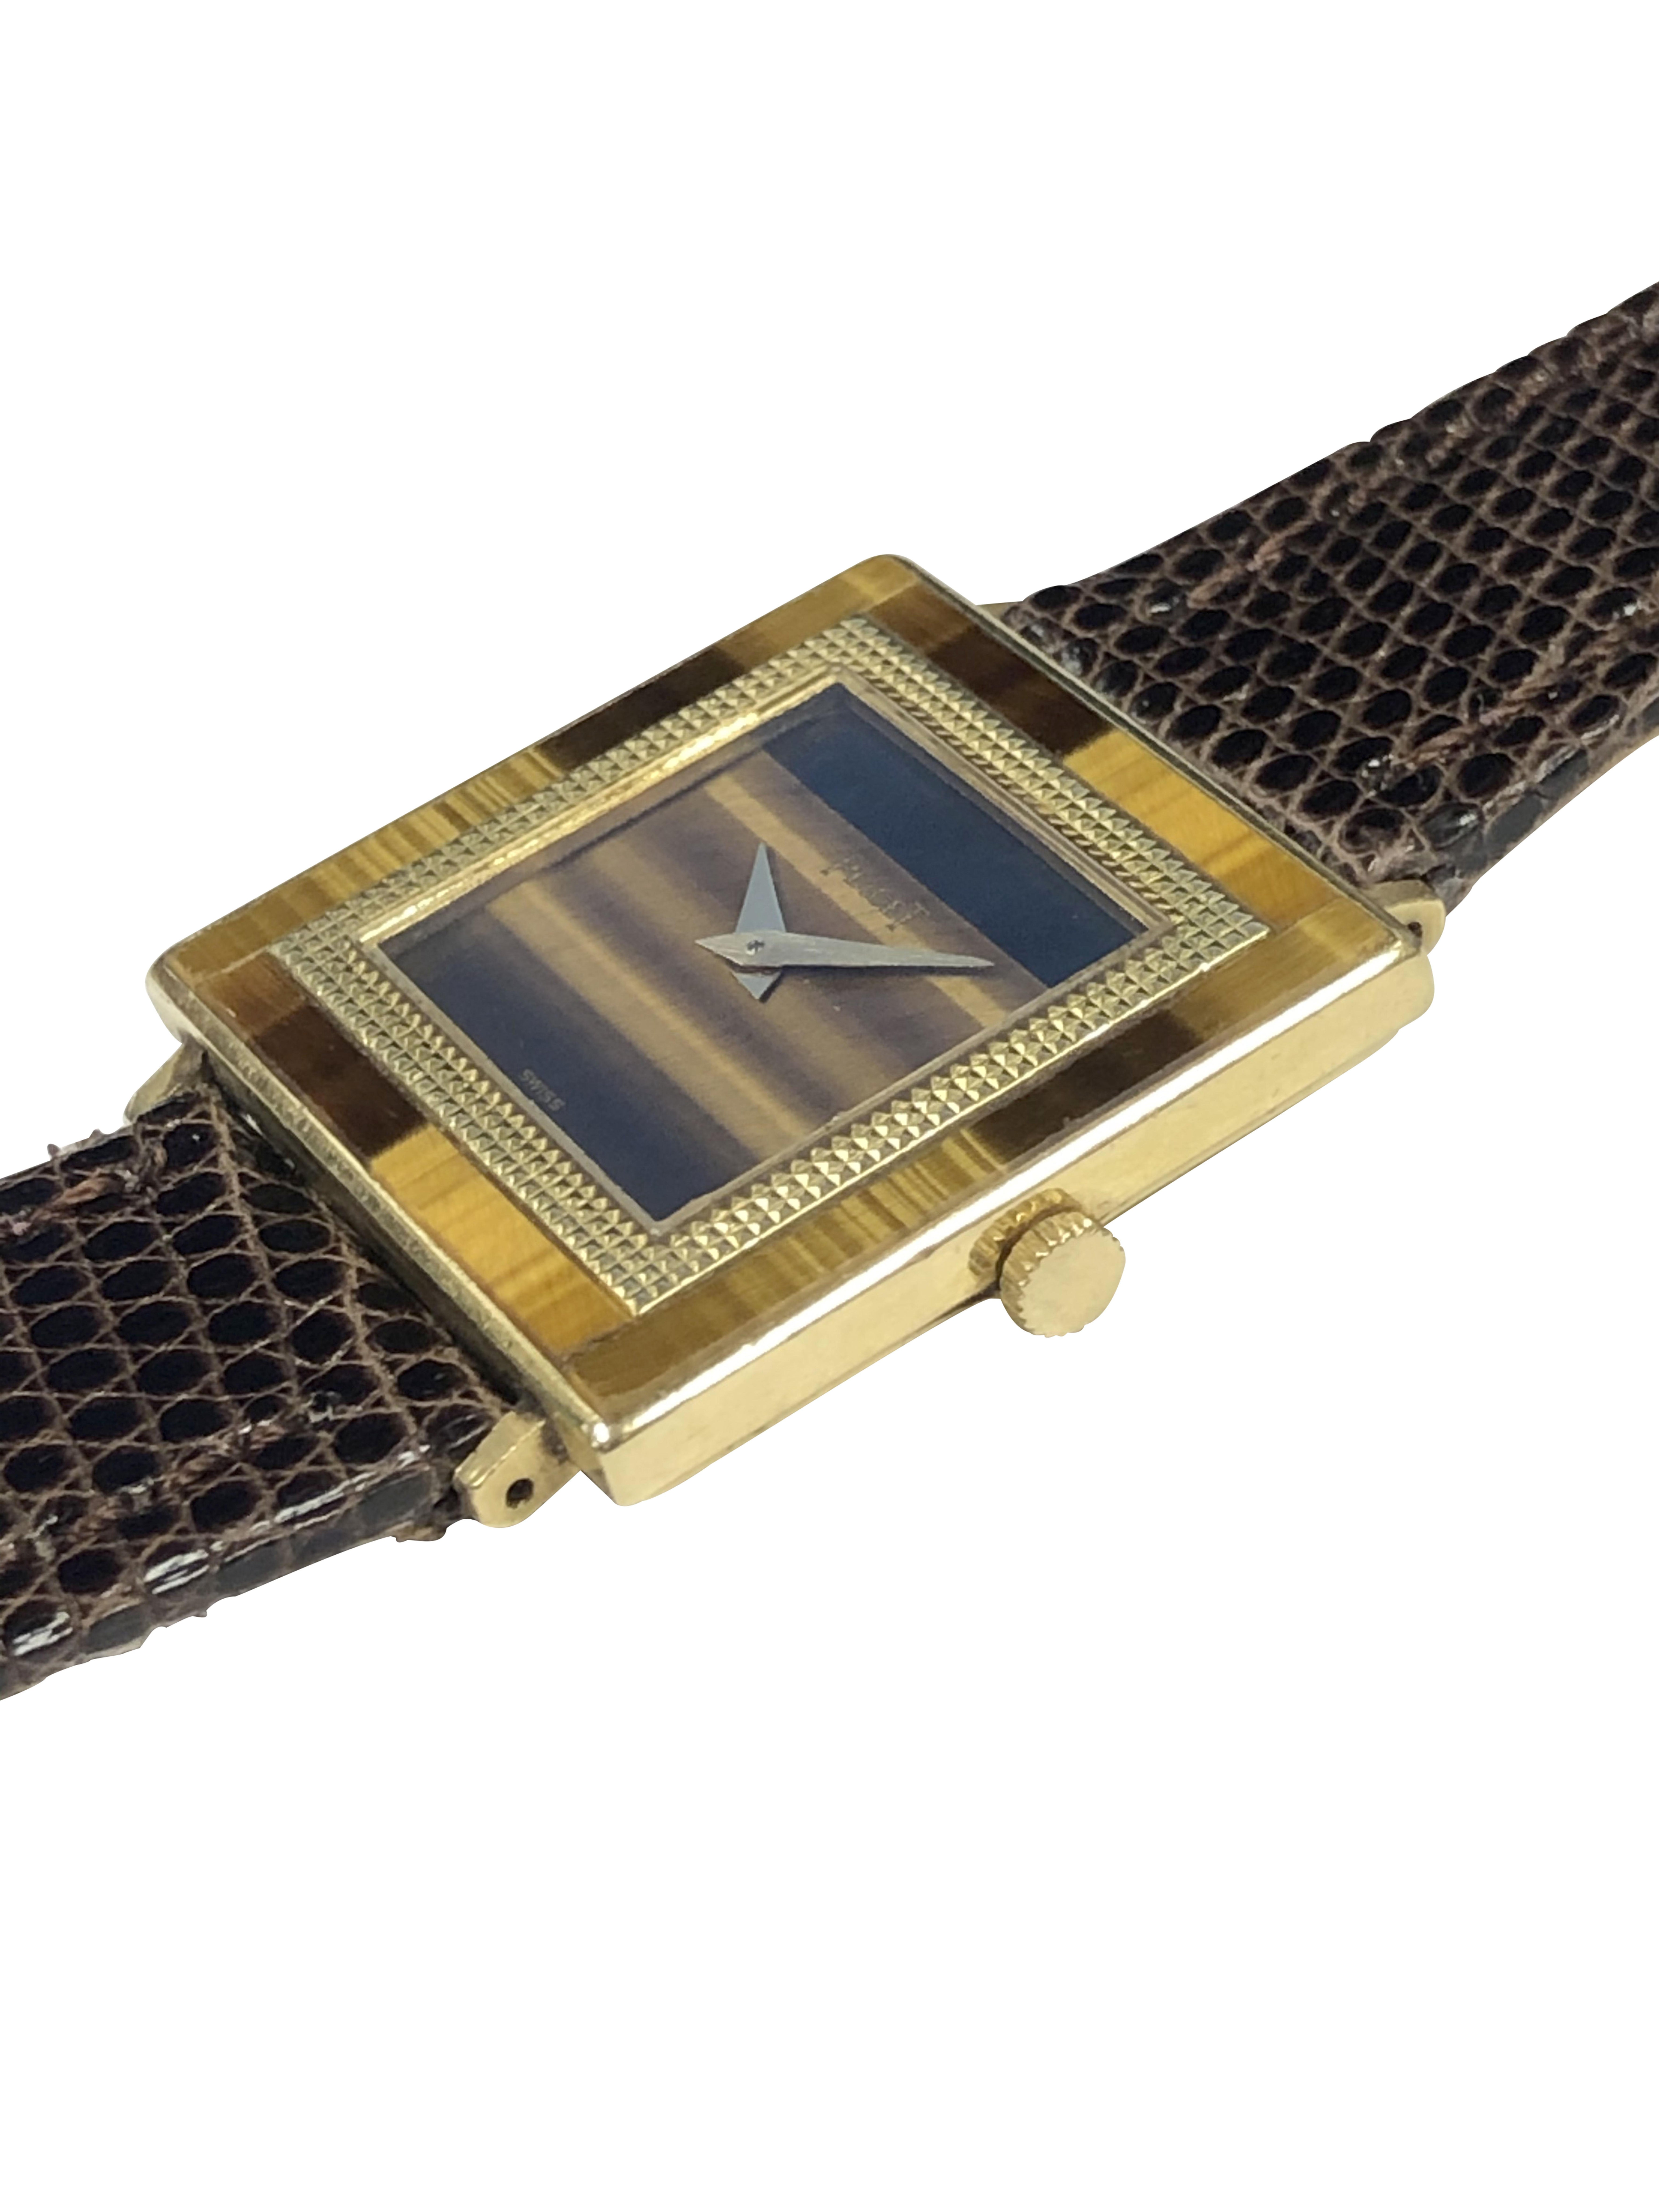 Circa 1970 Piaget Wrist Watch, 30 X 25 M.M. X 5 M.M. thick 18K Yellow Gold 2 Piece case with Tigers Eye set bezel and inner Pyramid Textured Bezel. 17 Jewel Mechanical, Manual wind movement. Tigers Eye dial with Gold Hands. New Brown Lizard Strap